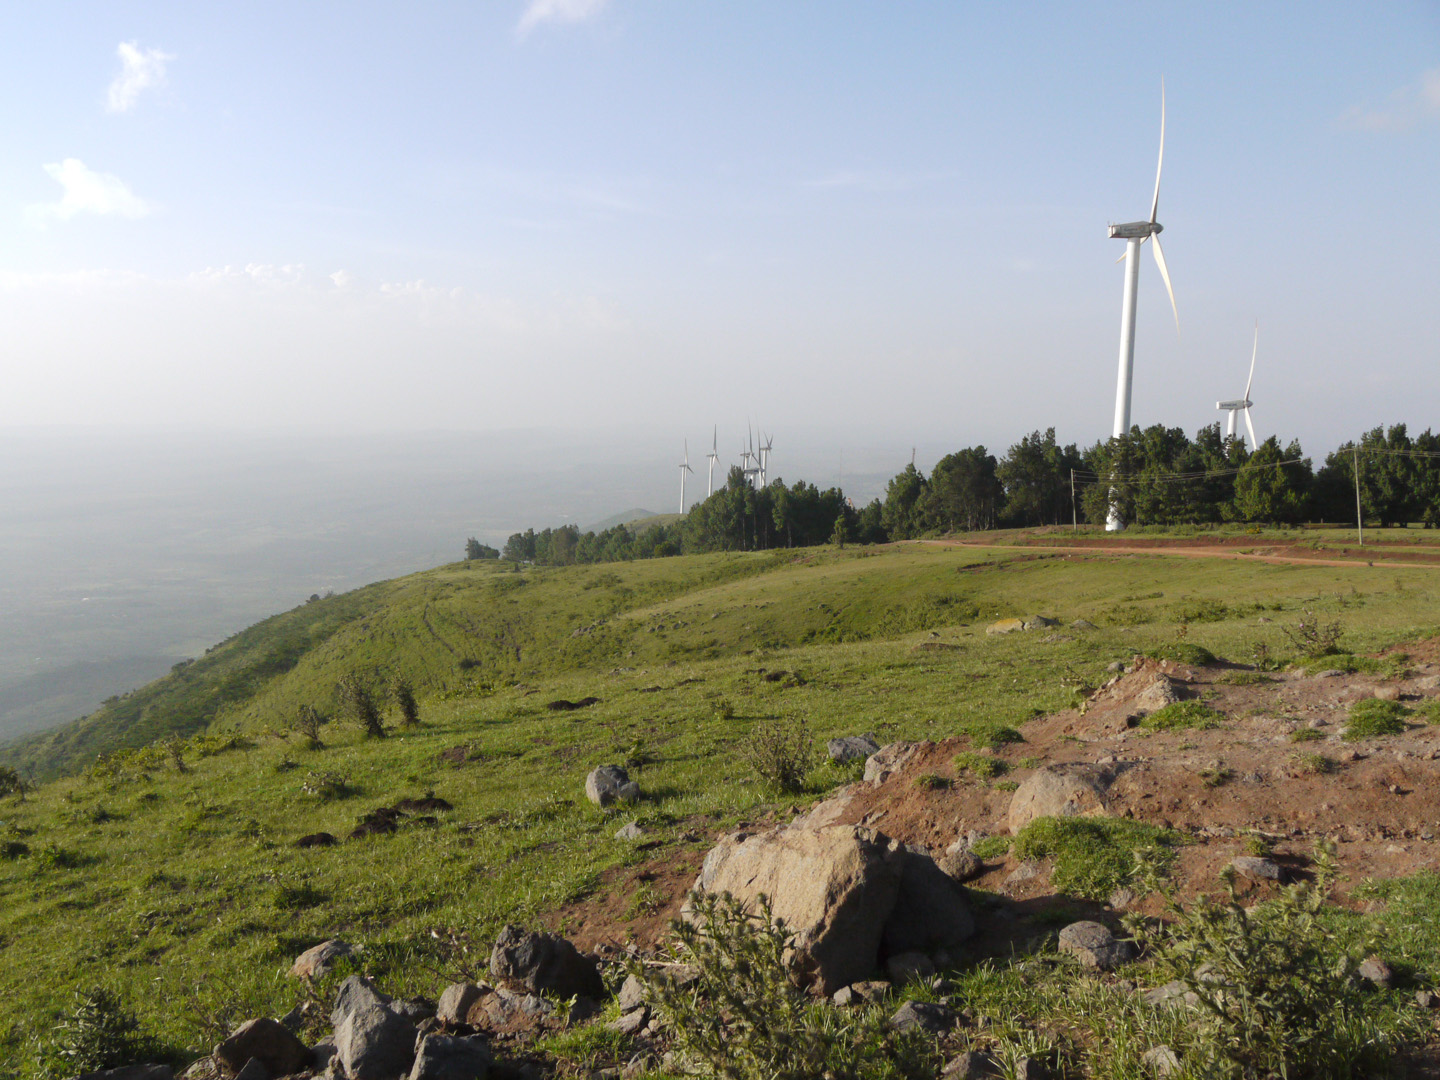 Ngong hills with turbines